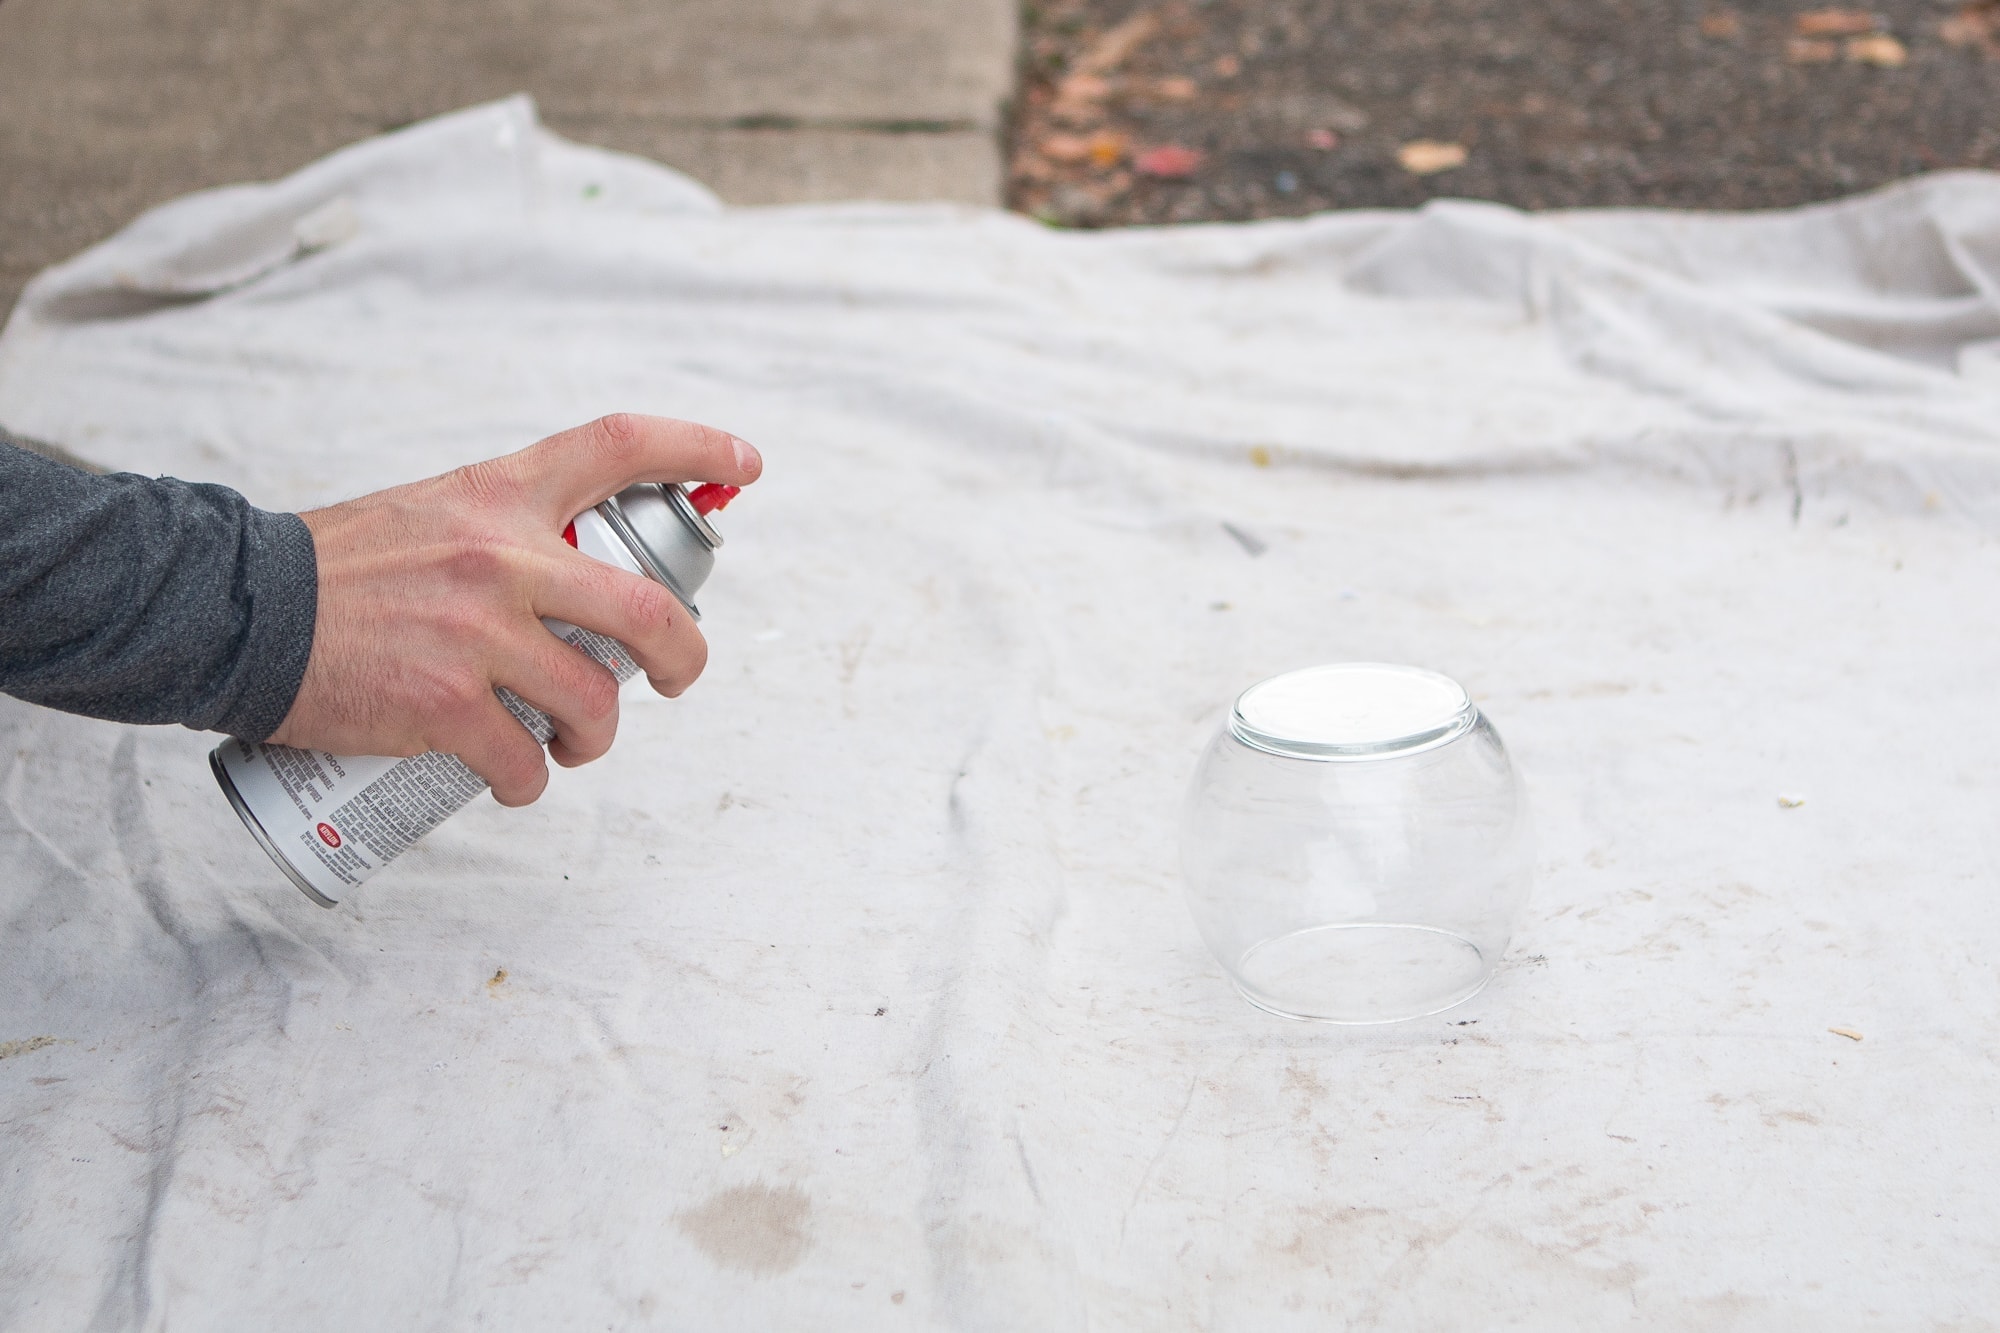 How to spray paint